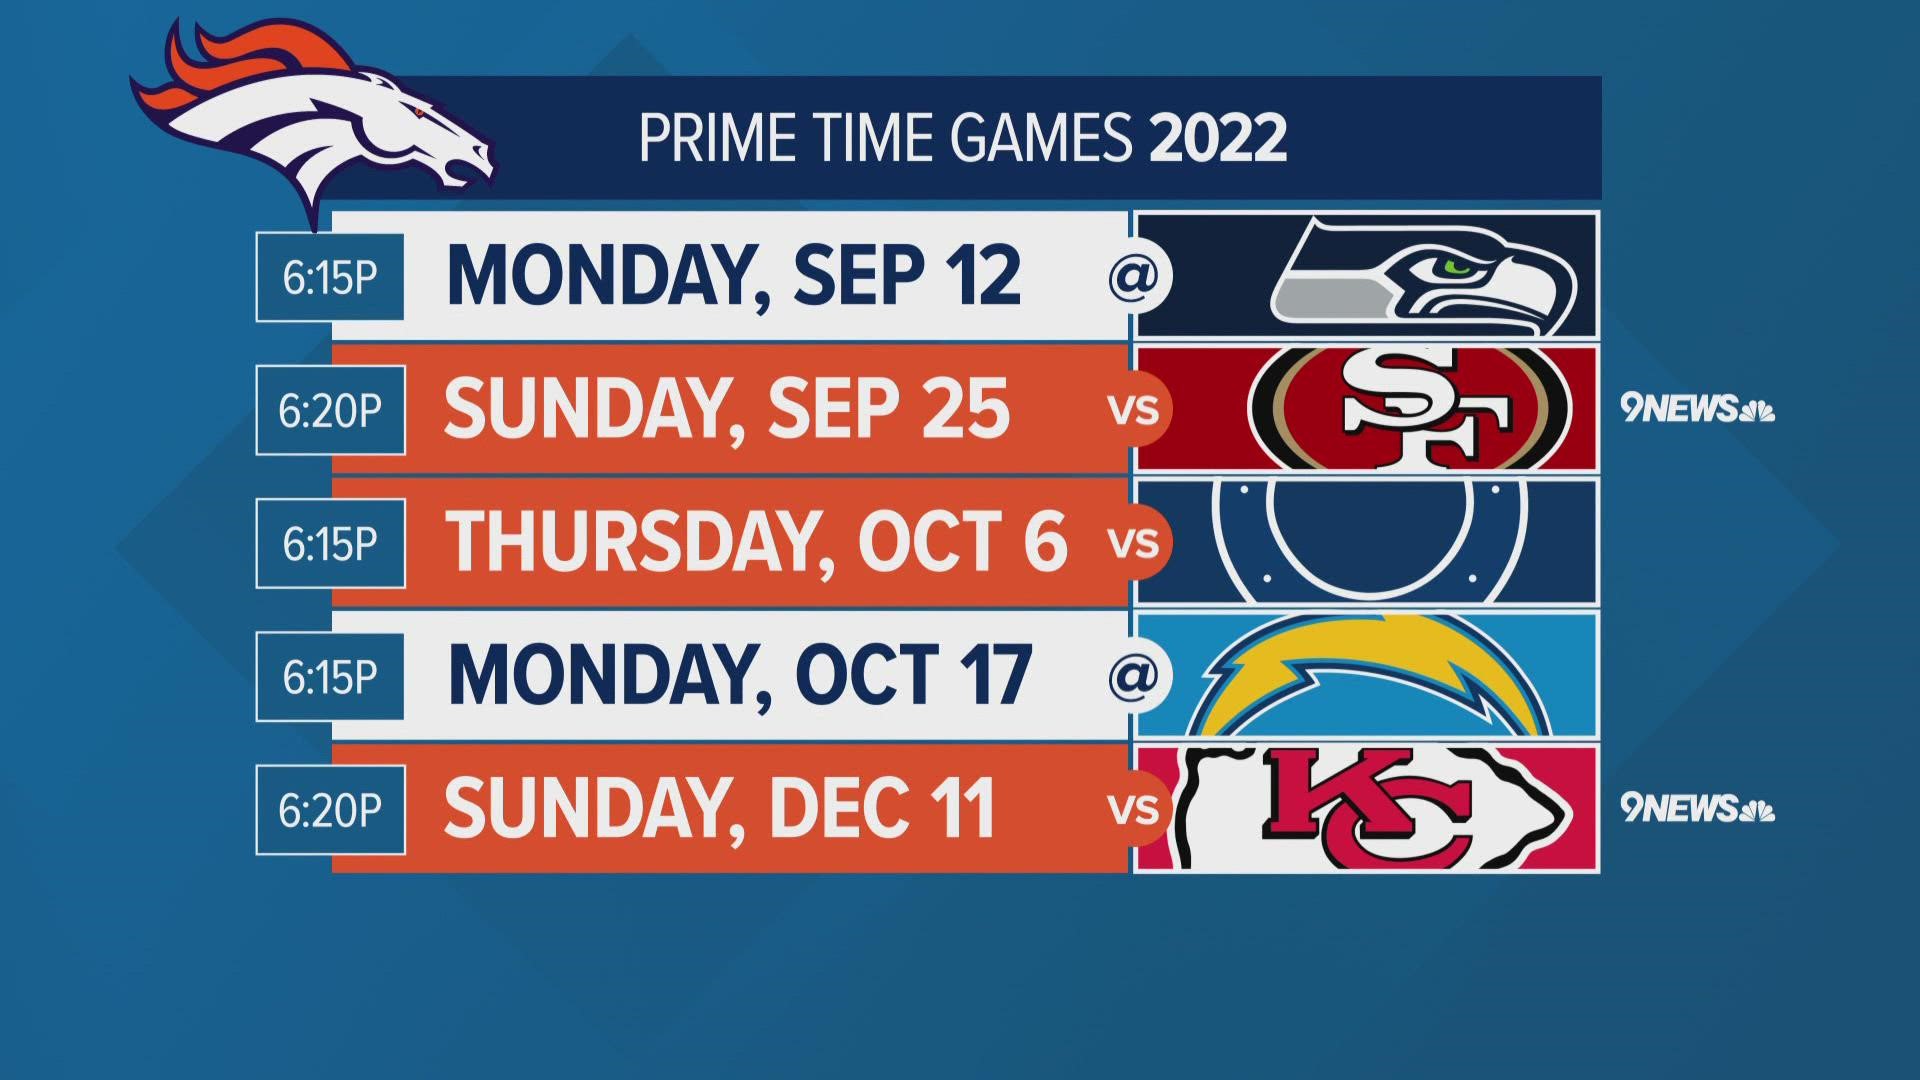 schedule for thursday night nfl football